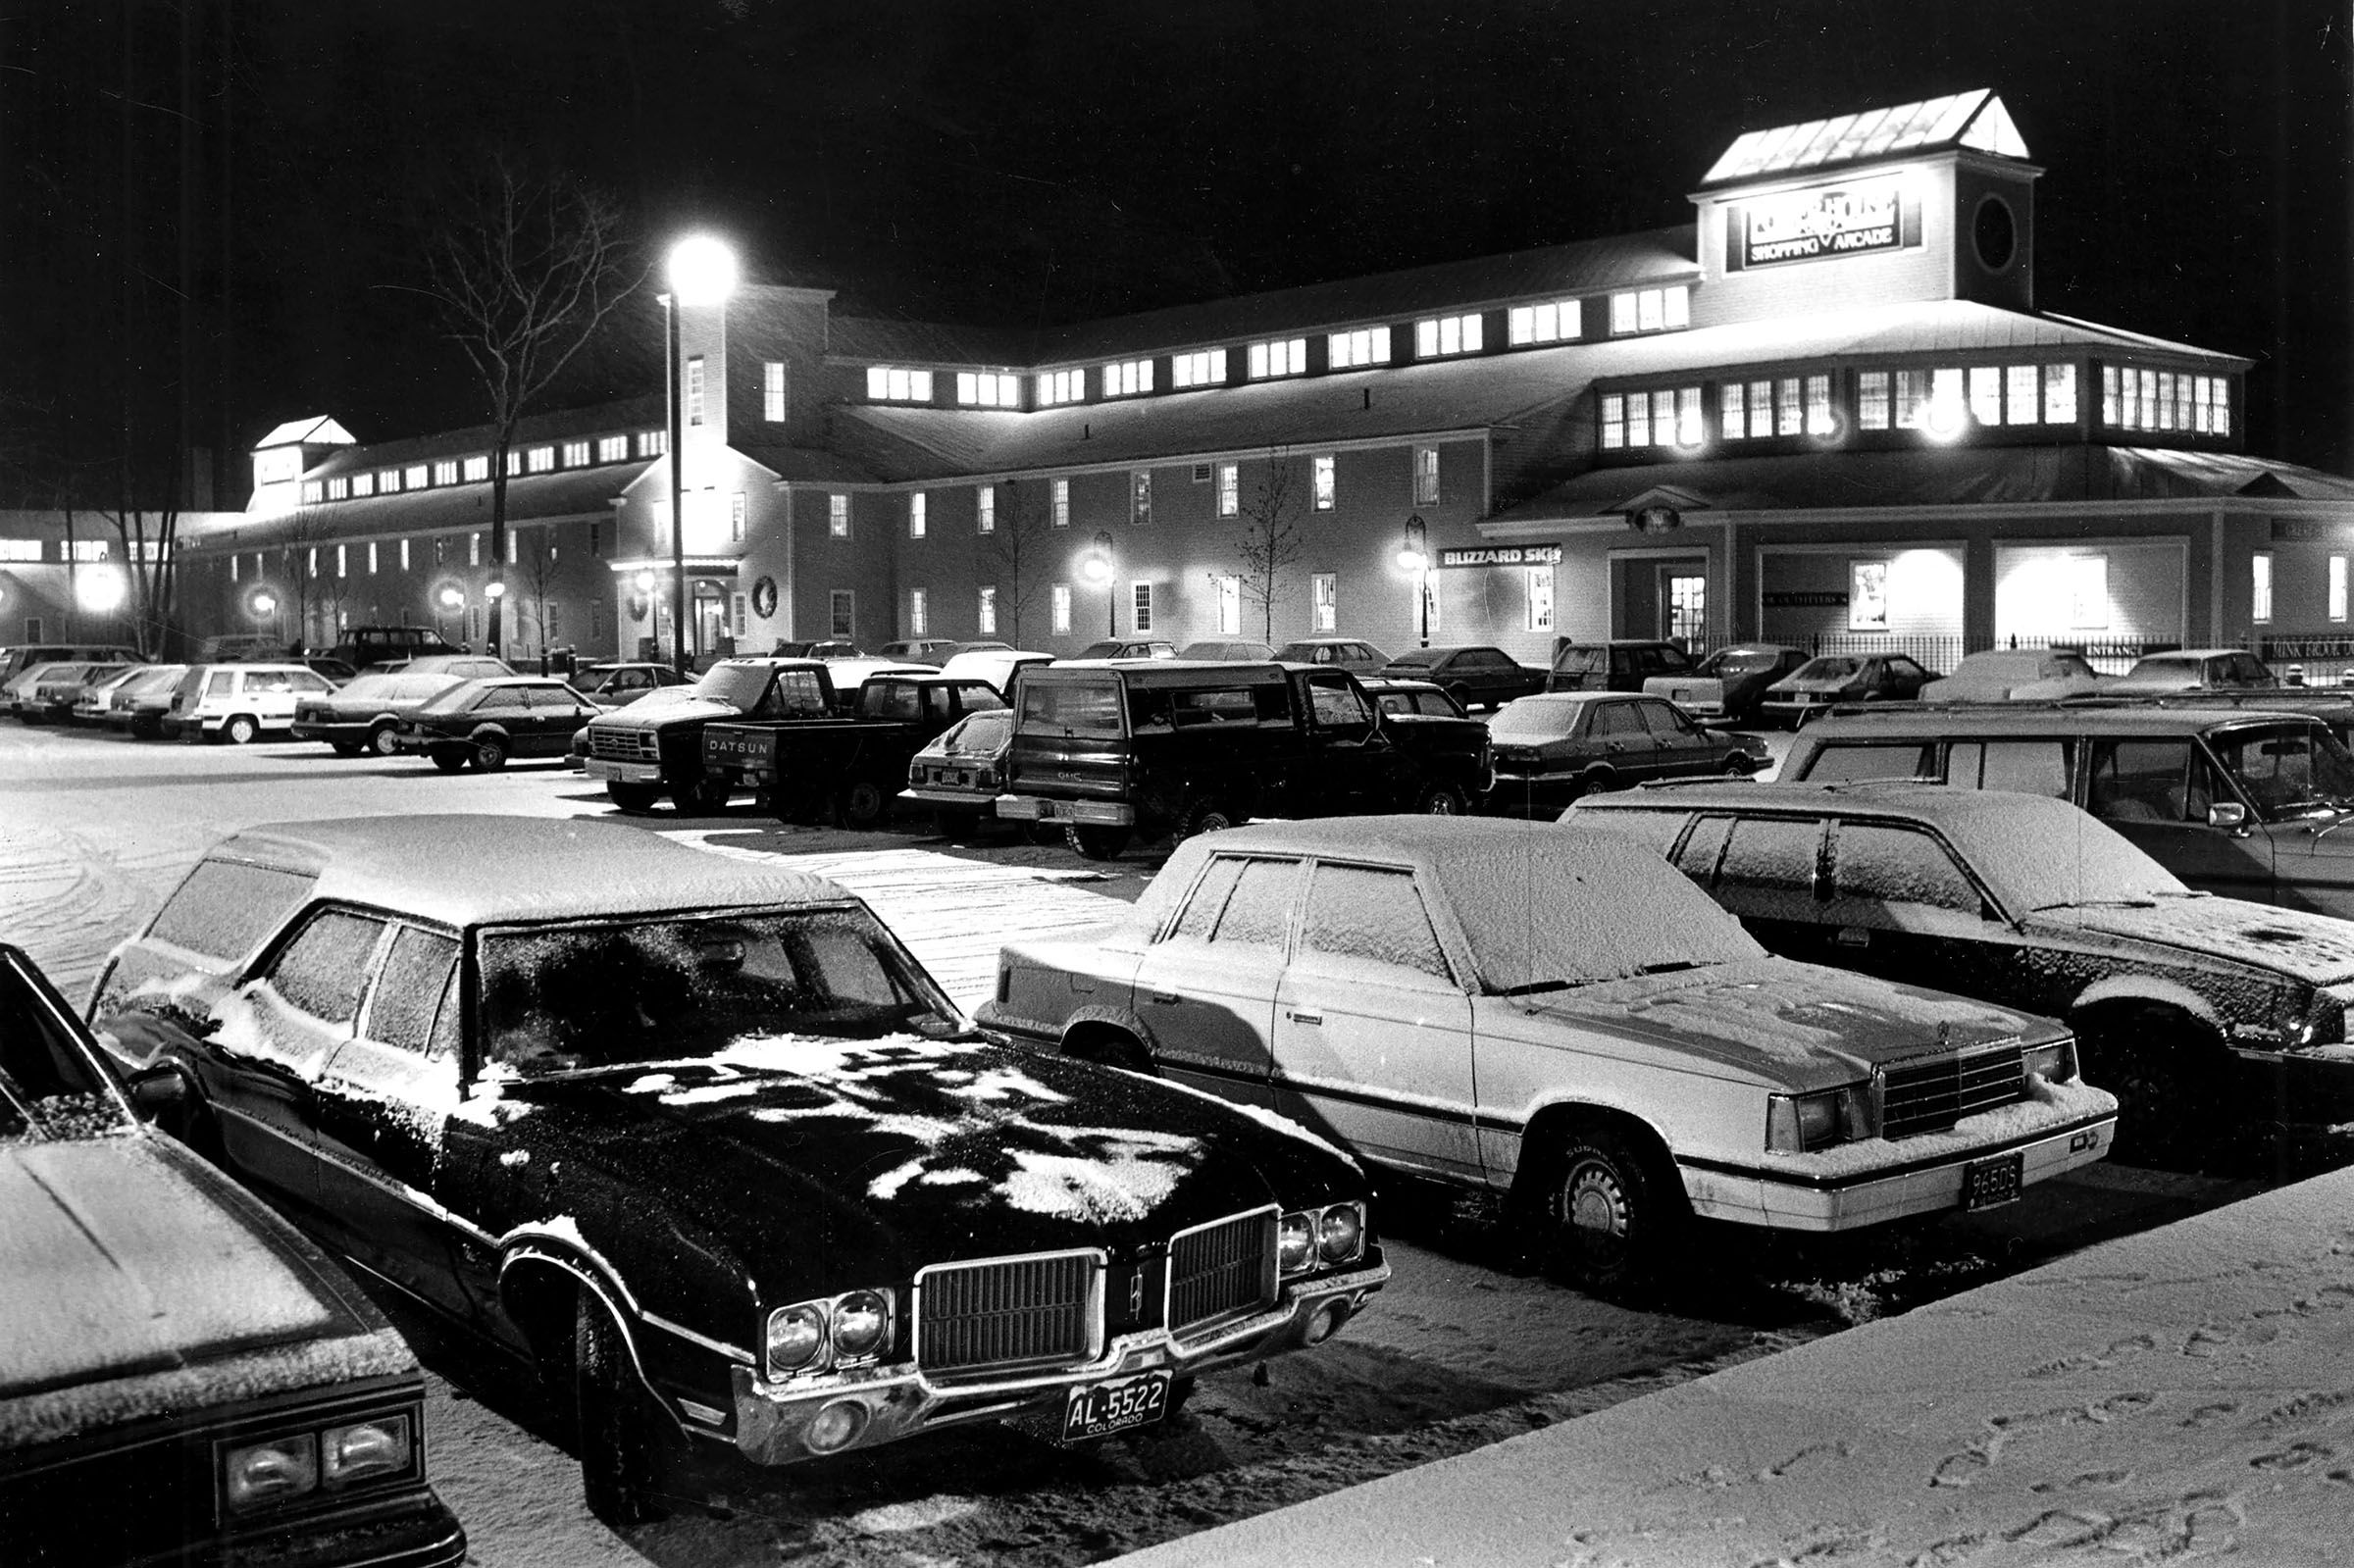 The parking lot at the Powerhouse Mall in West Lebanon, N.H., is filled with holiday shoppers in a mid-1980s photograph. The renovated mill building opened earlier in the decade. (Valley News - Dan Hunting) Copyright Valley News. May not be reprinted or used online without permission. Send requests to permission@vnews.com.